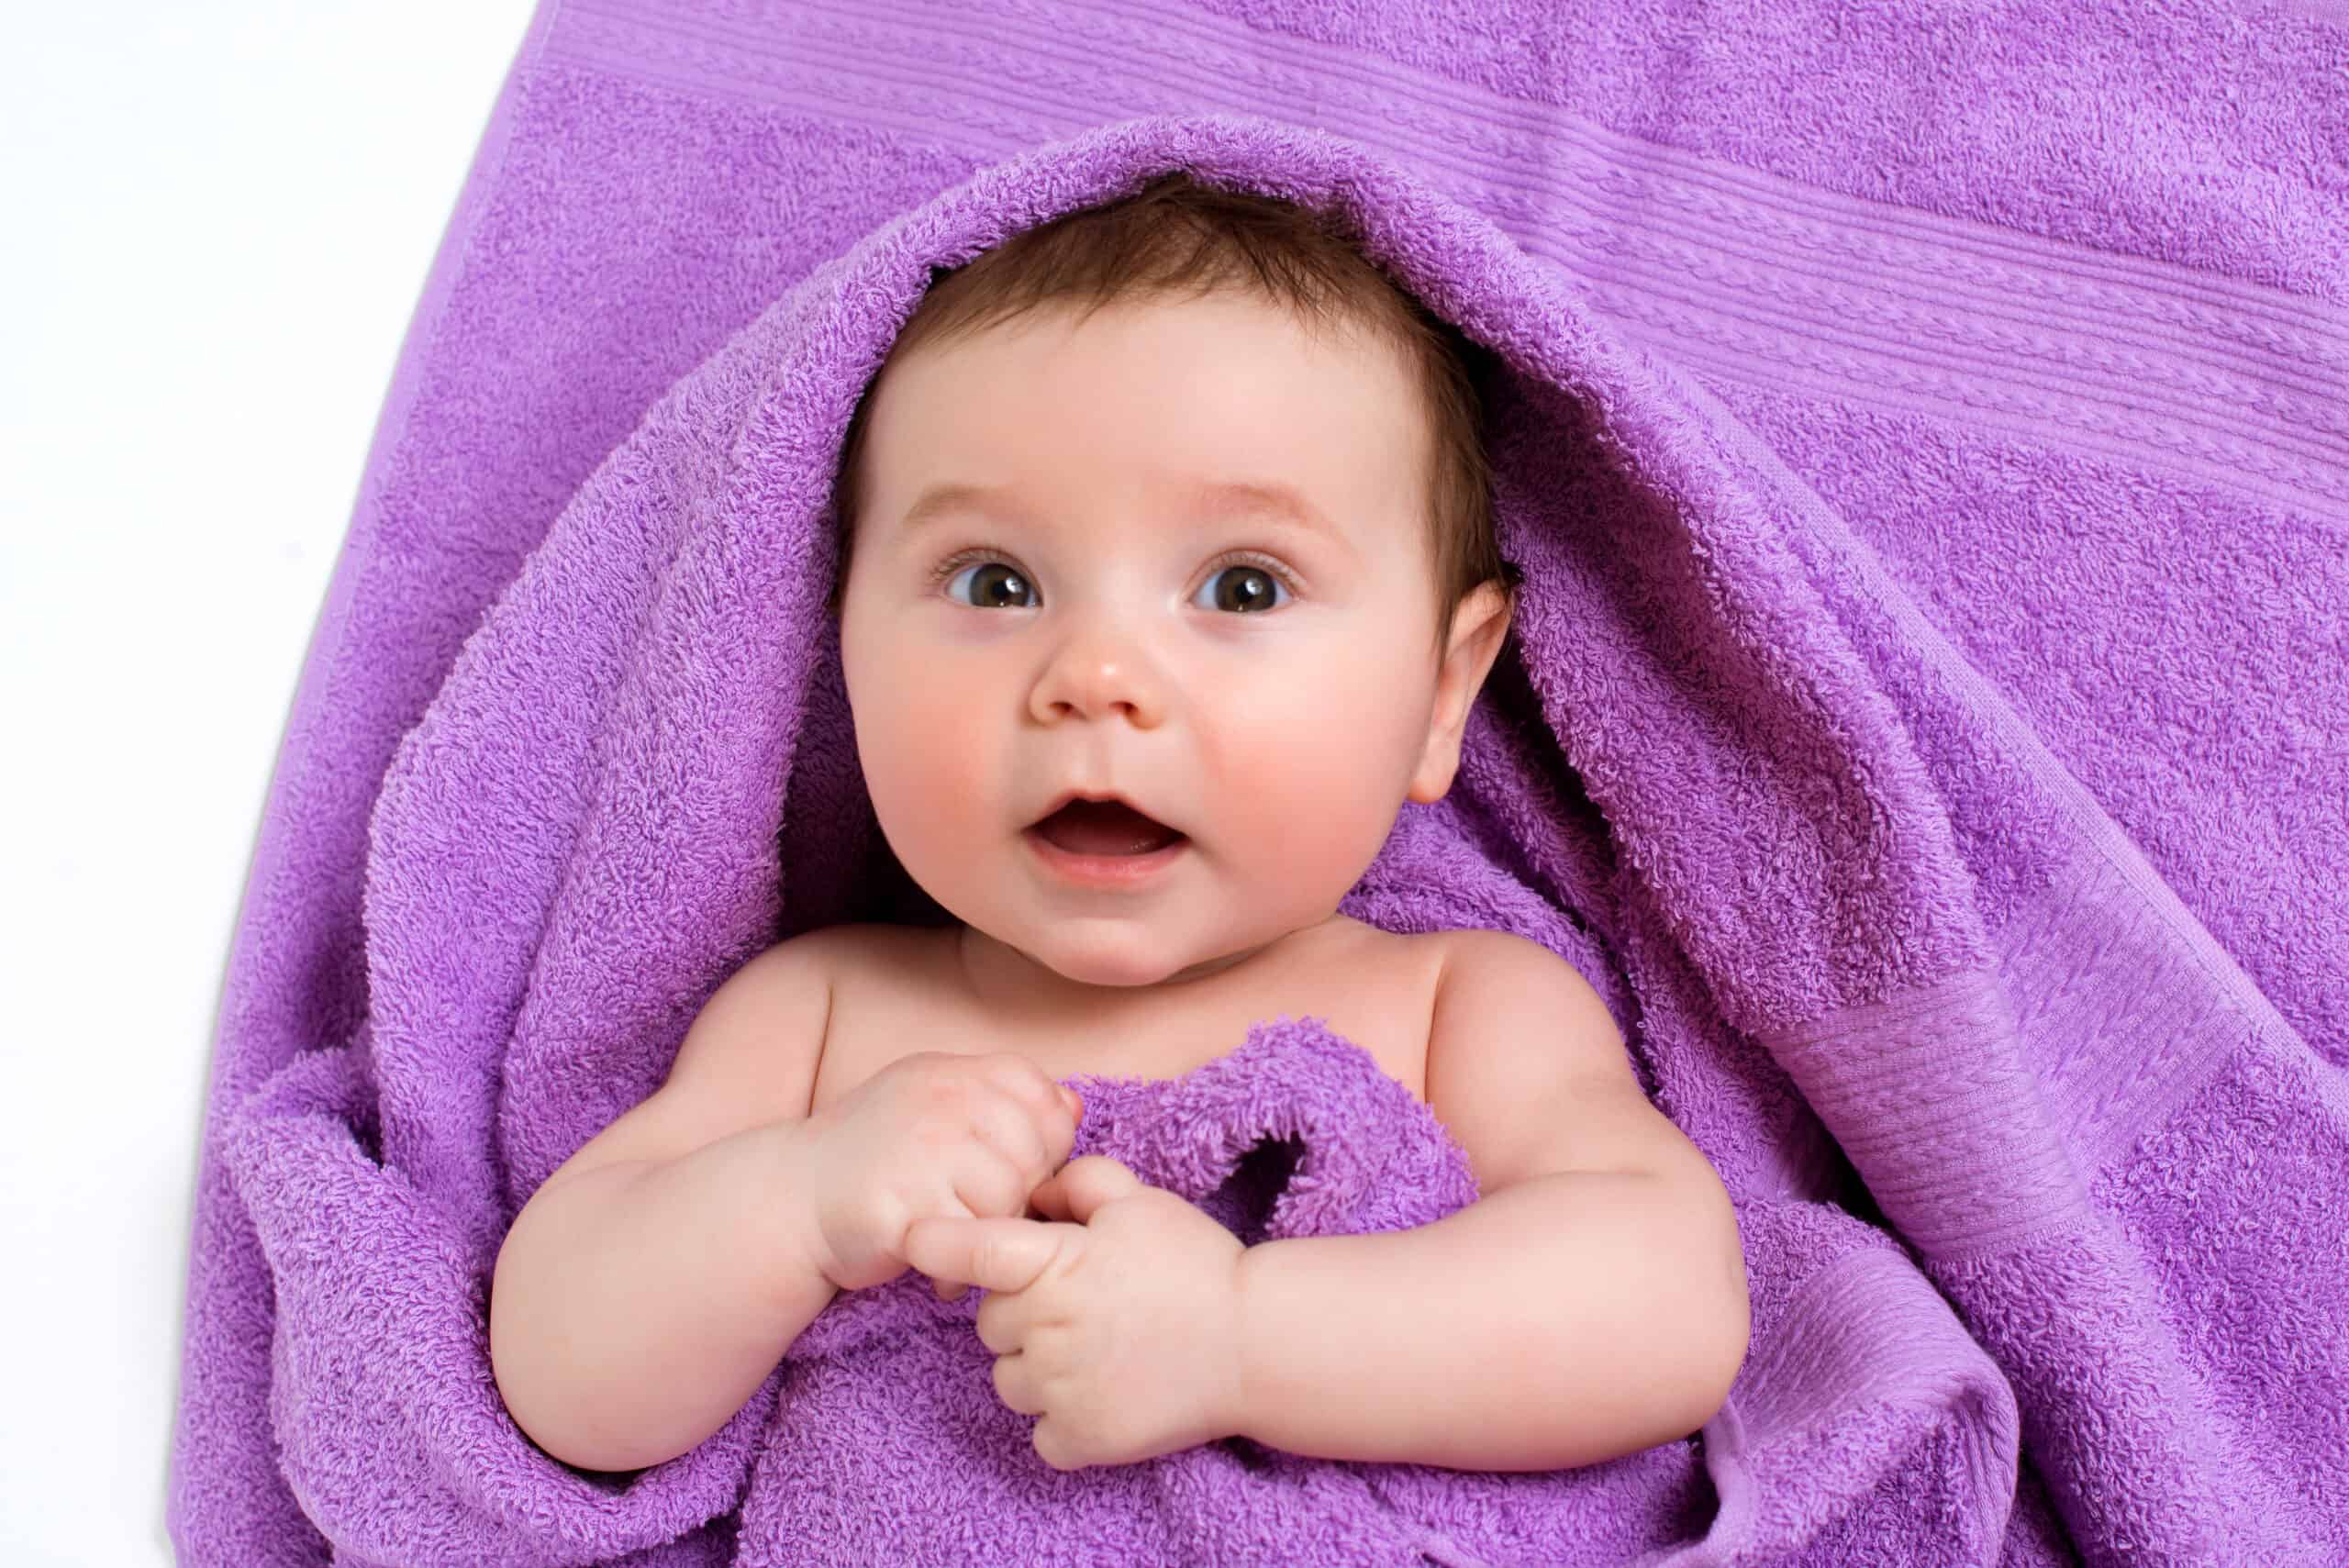 Newborn baby lying down and smiling in a purple towel